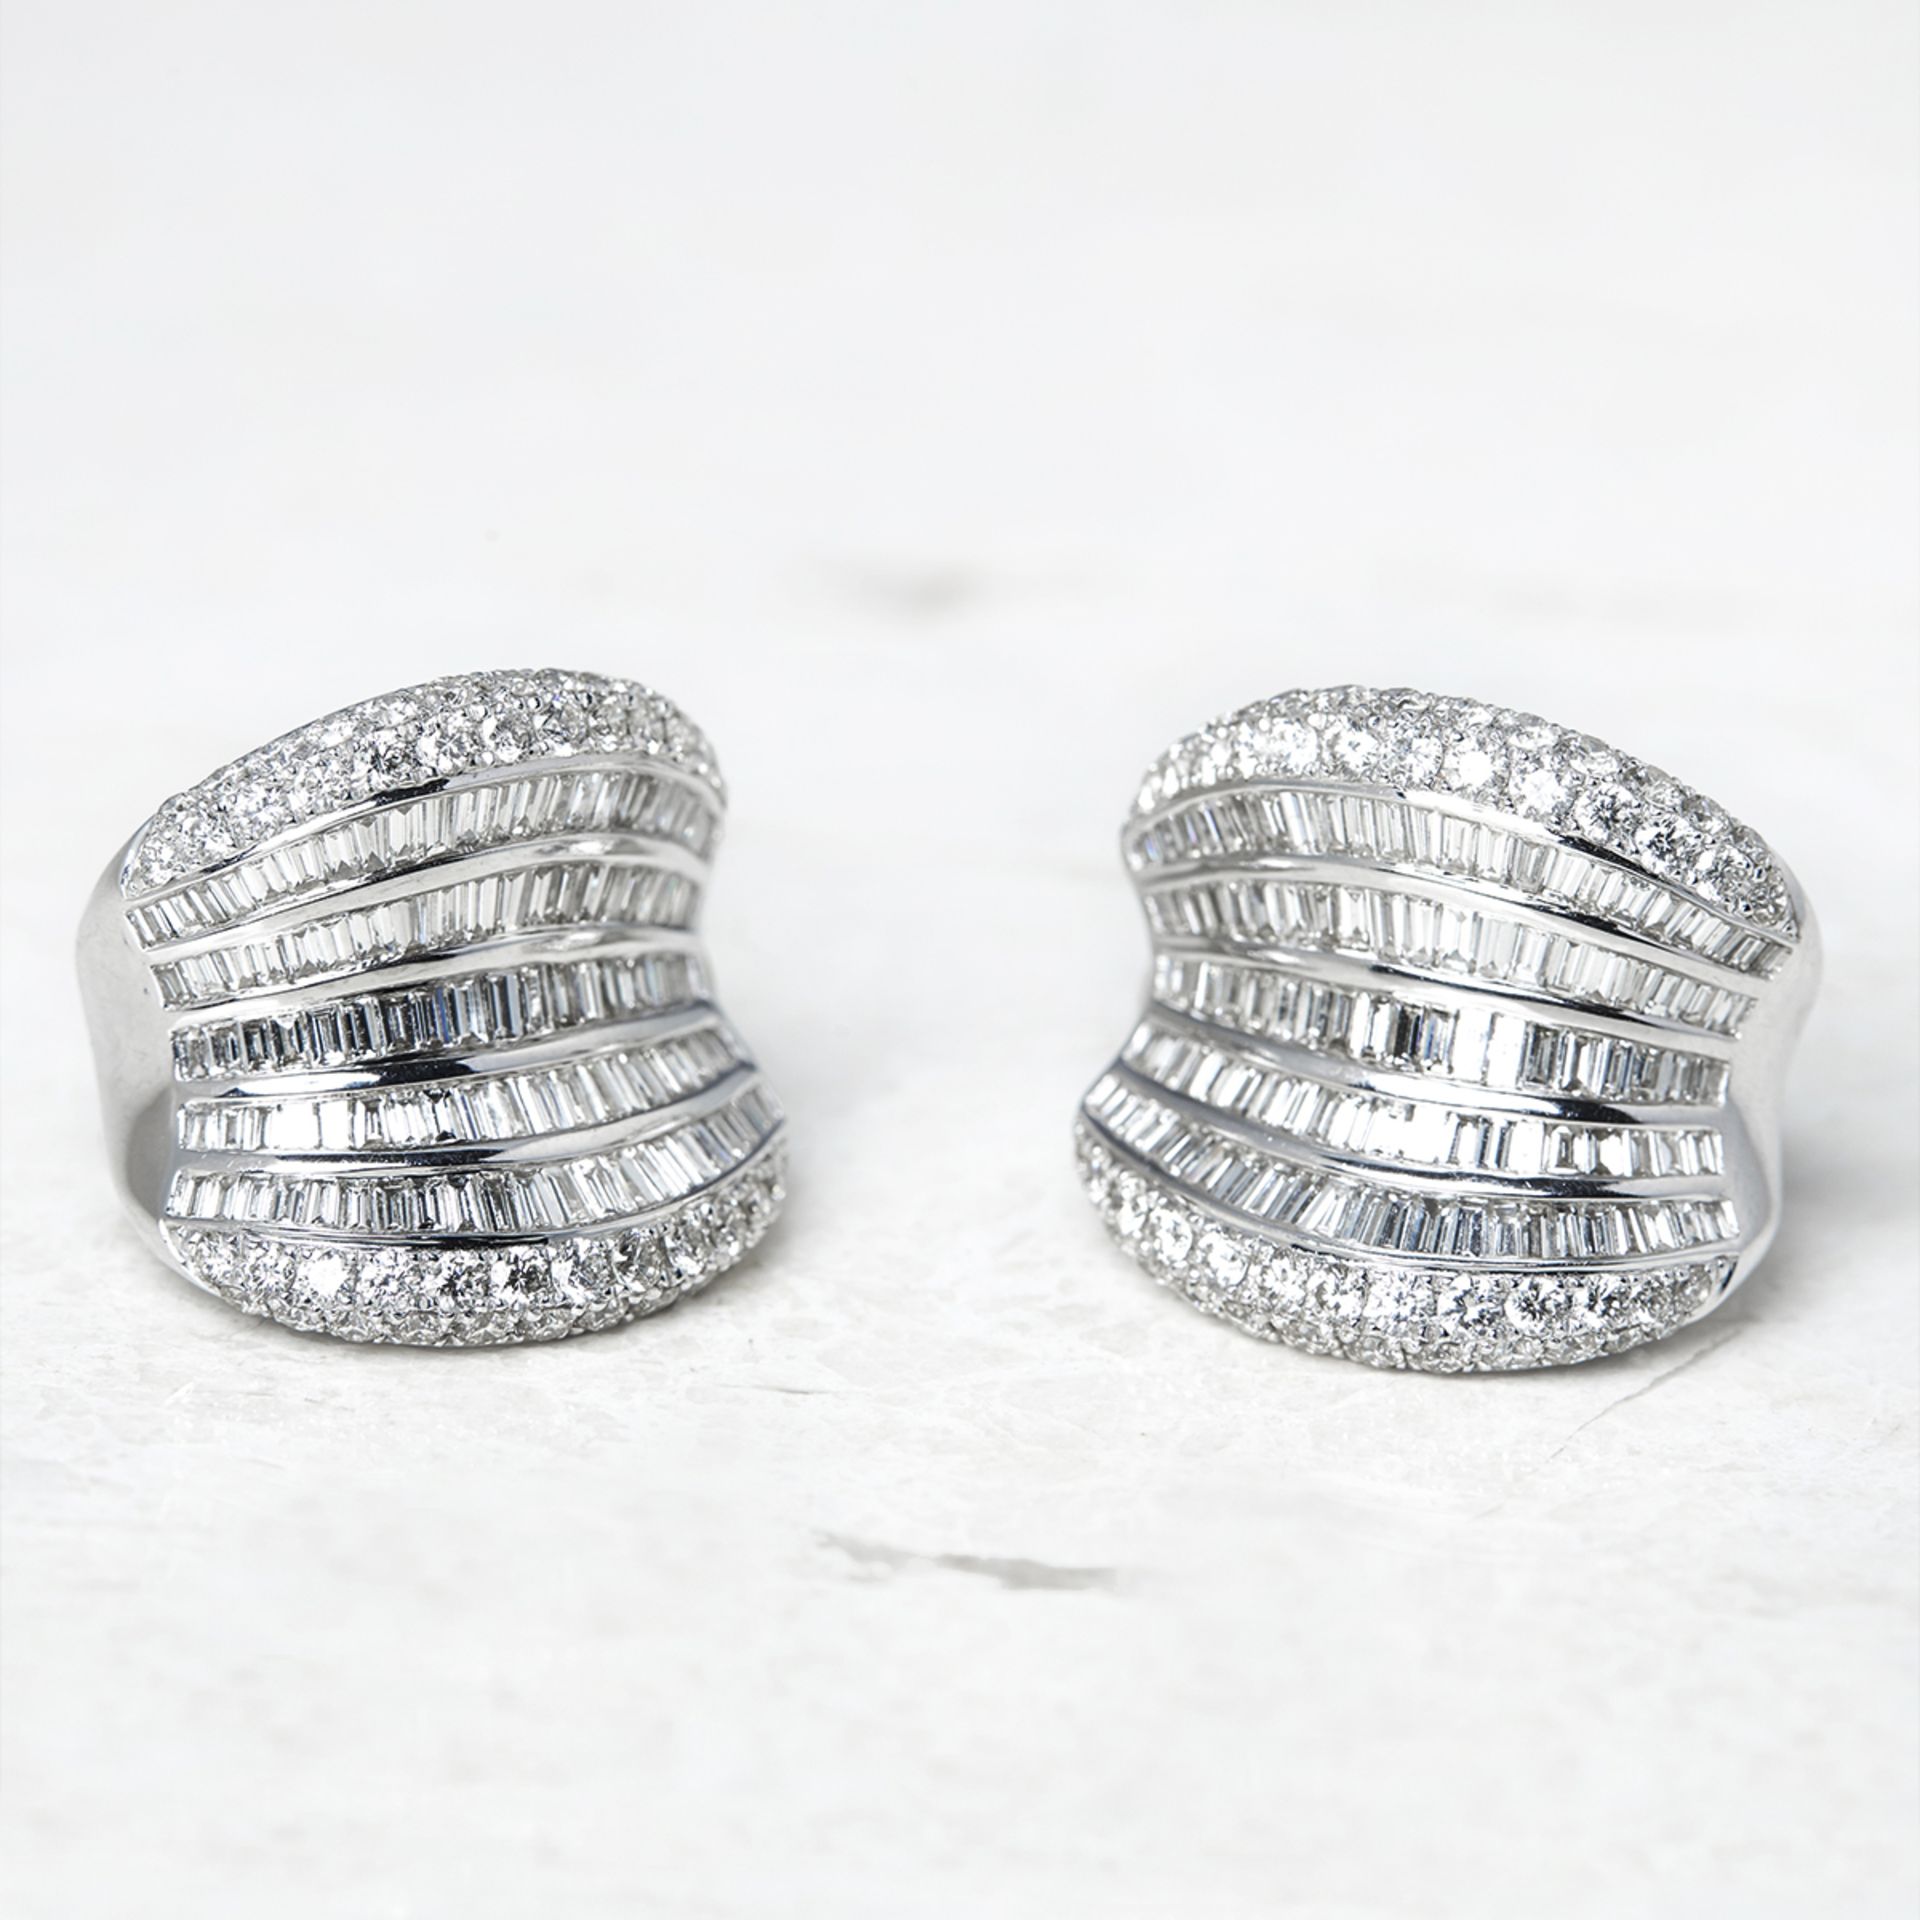 Unbranded, 18k White Gold 12.00ct Baguette & Round Cut Diamond Earrings - Image 5 of 7